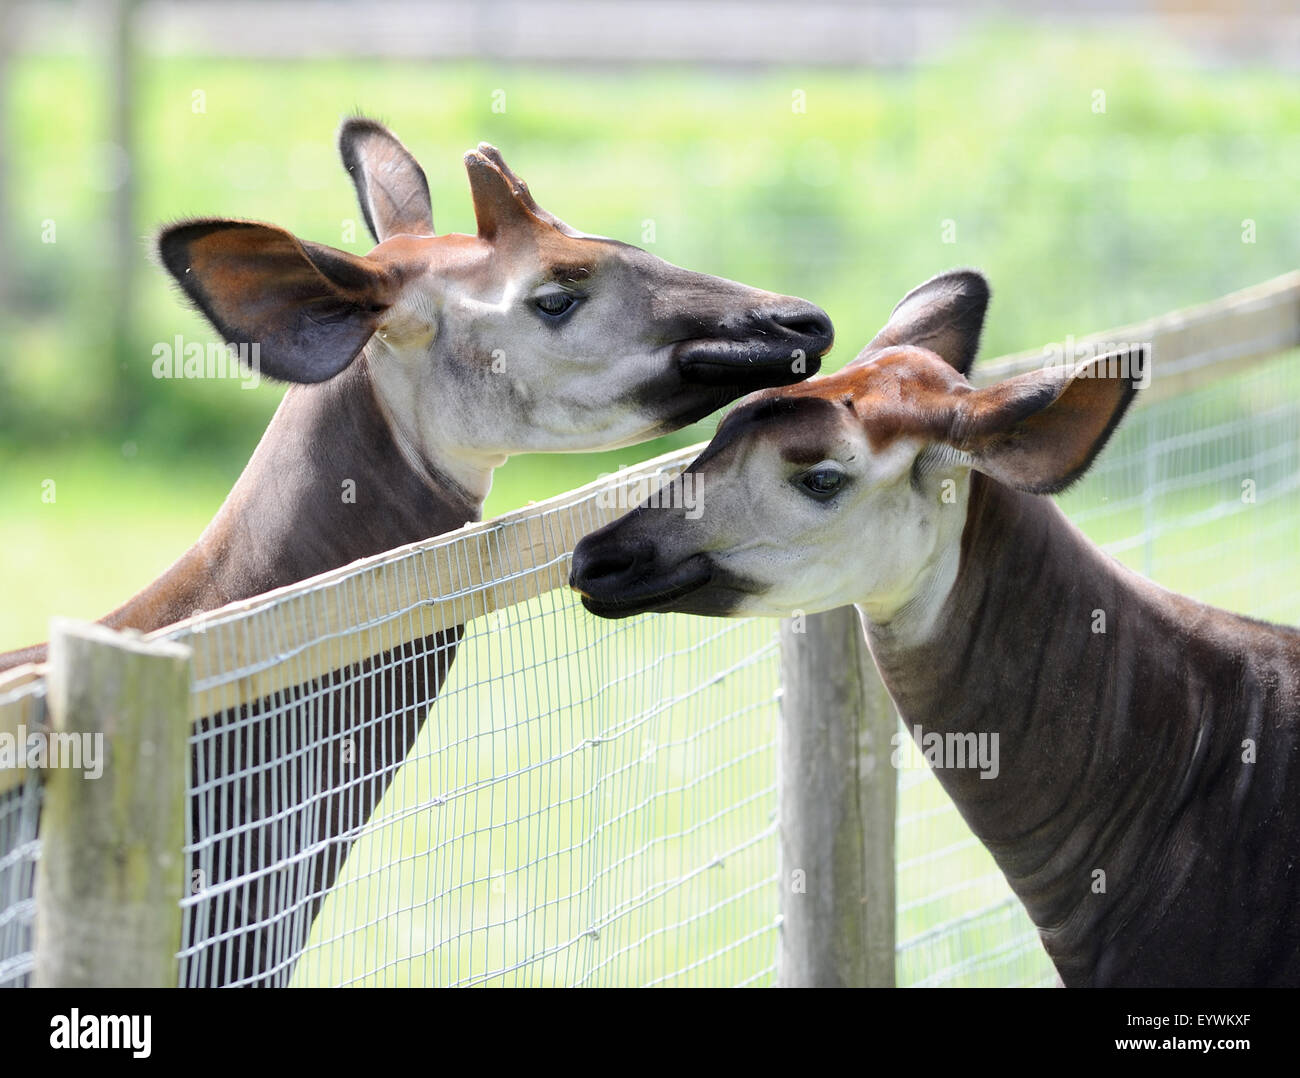 A male and female okapi get friendly over a wire fence. The male, on the left, has  short, hair-covered horns called ossicones. Stock Photo